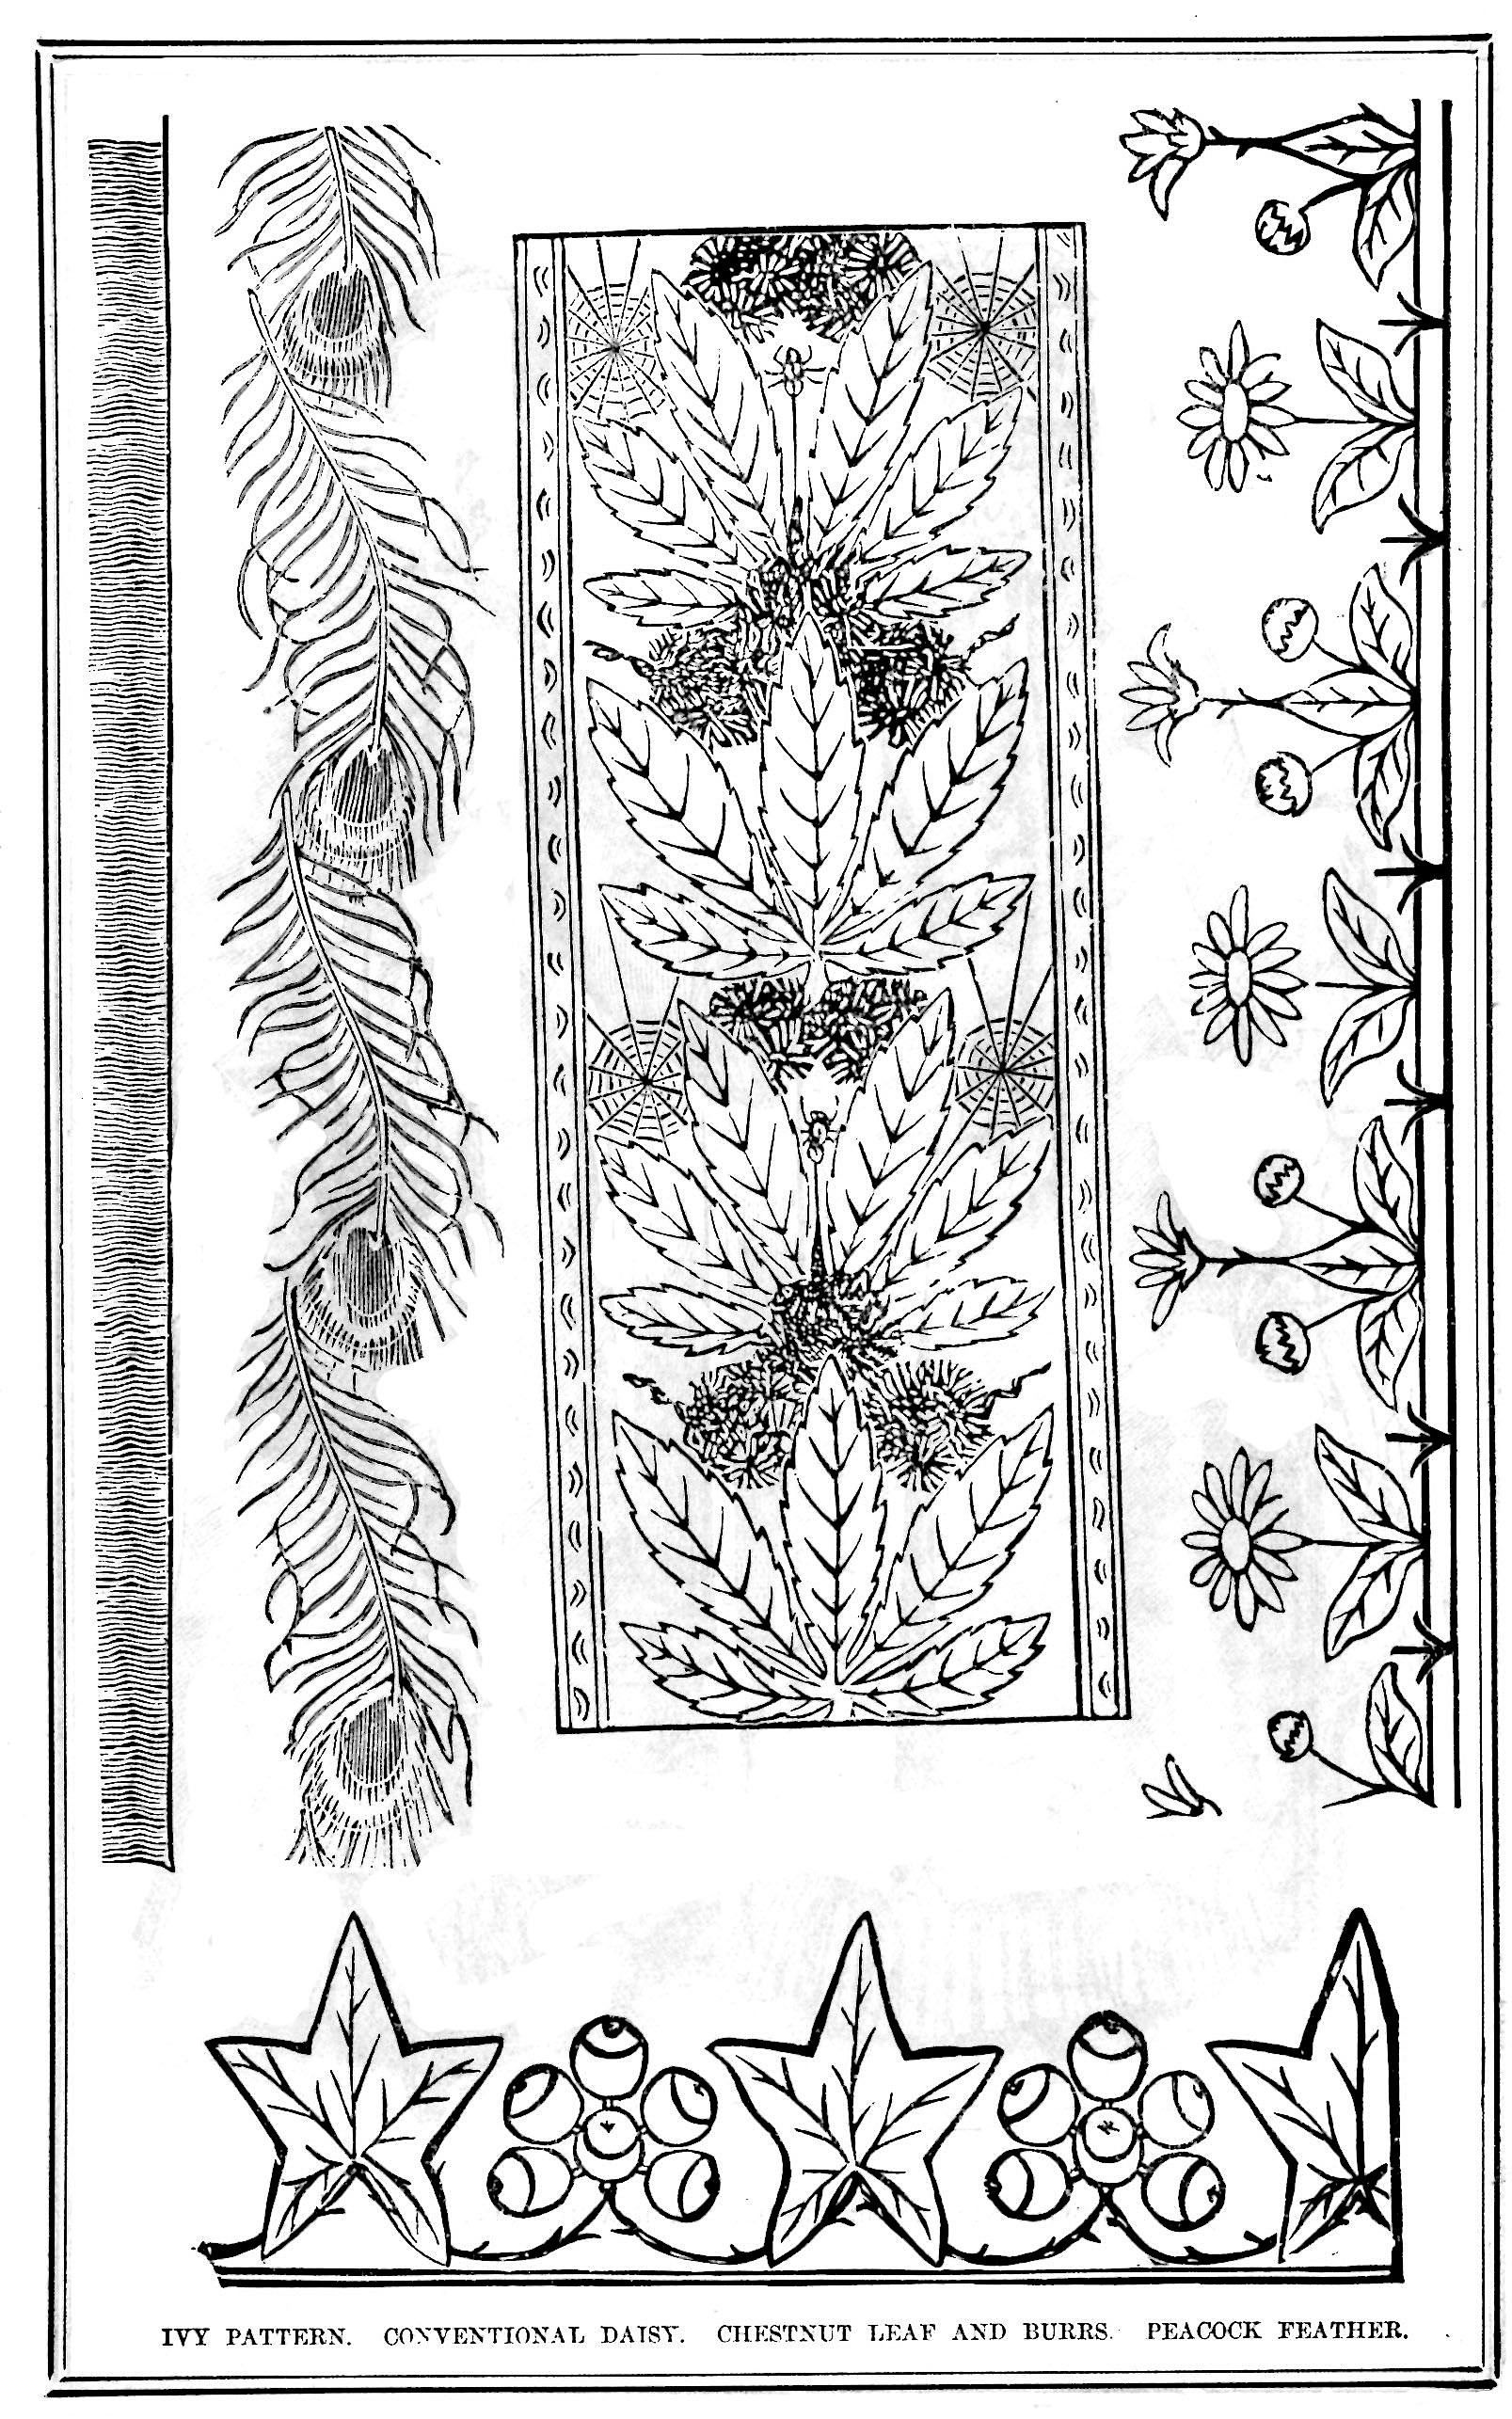 Antique Embroidery Patterns Victorian Era Embroidery Patterns Vintage Crafts And More